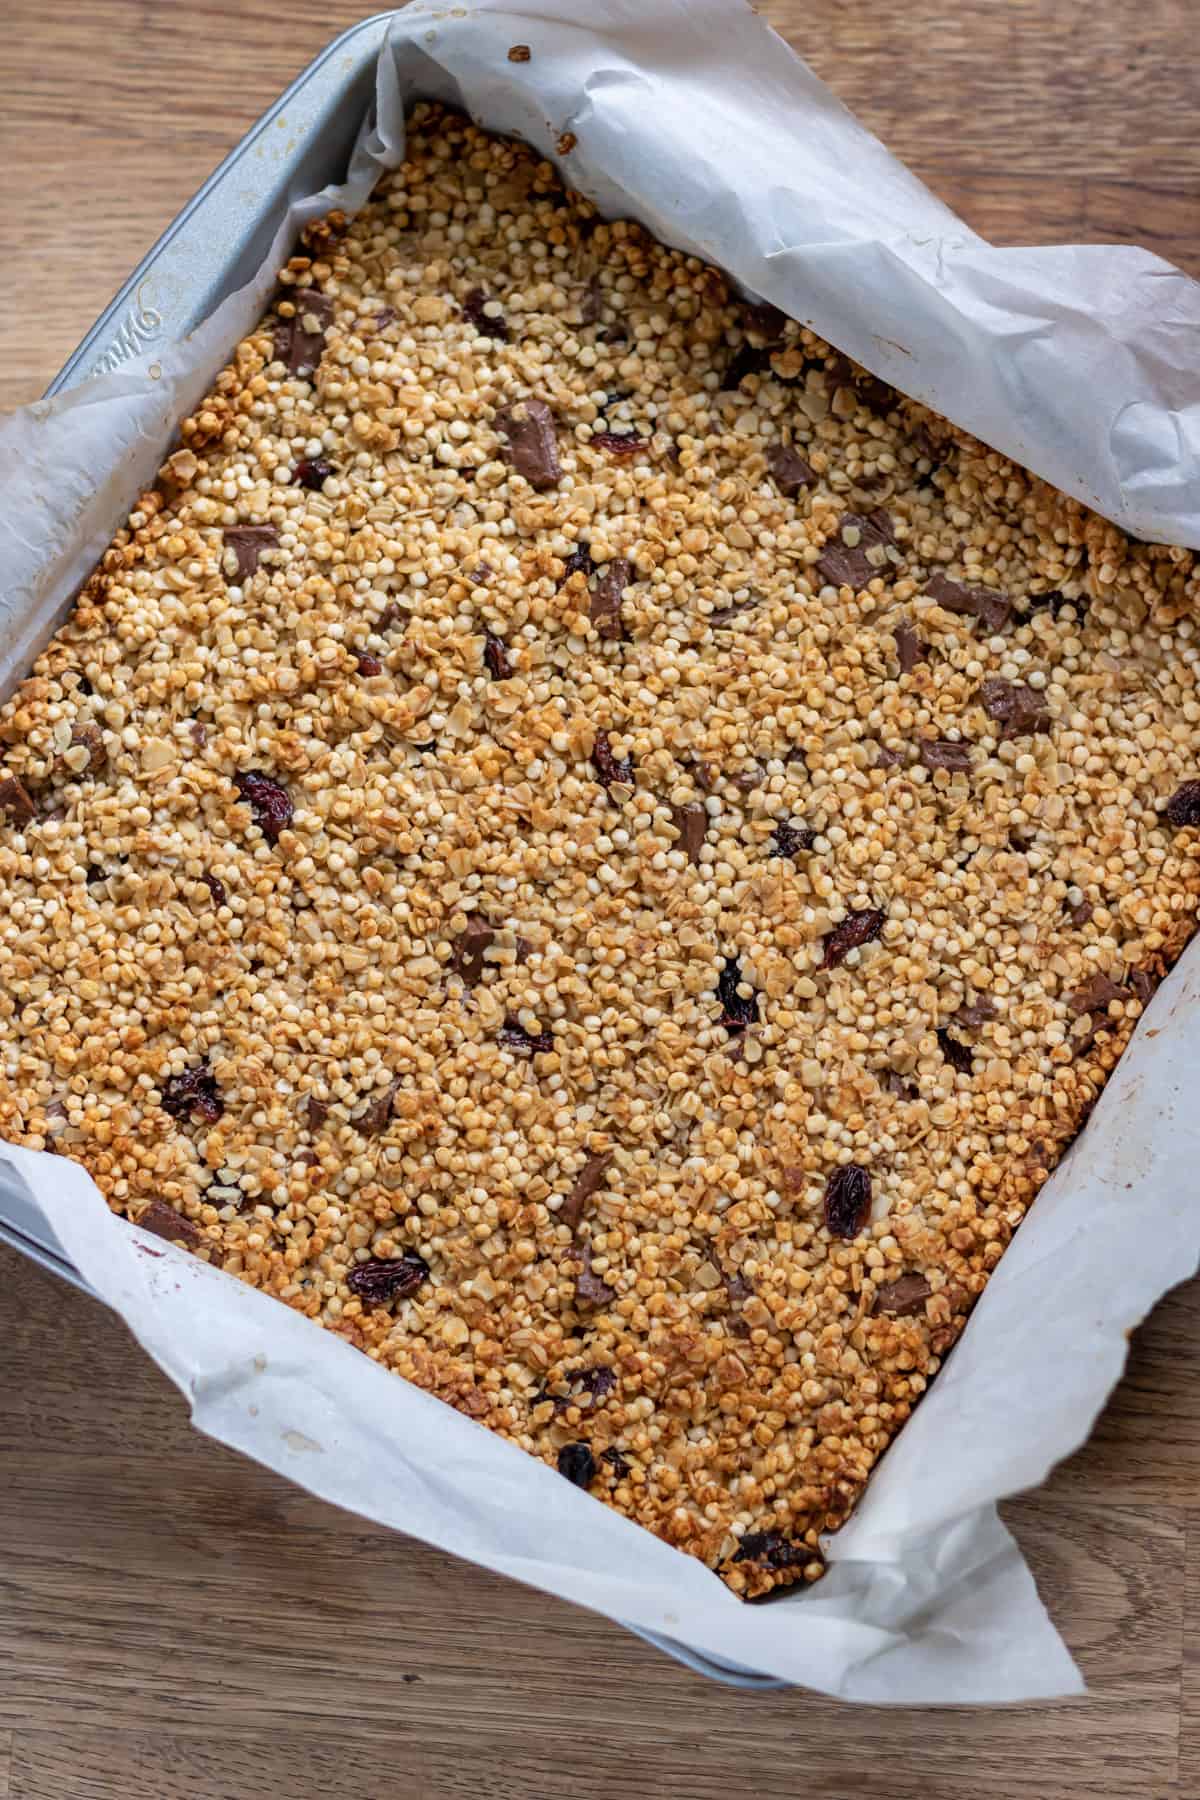 Baked chocolate quinoa squares in a pan.